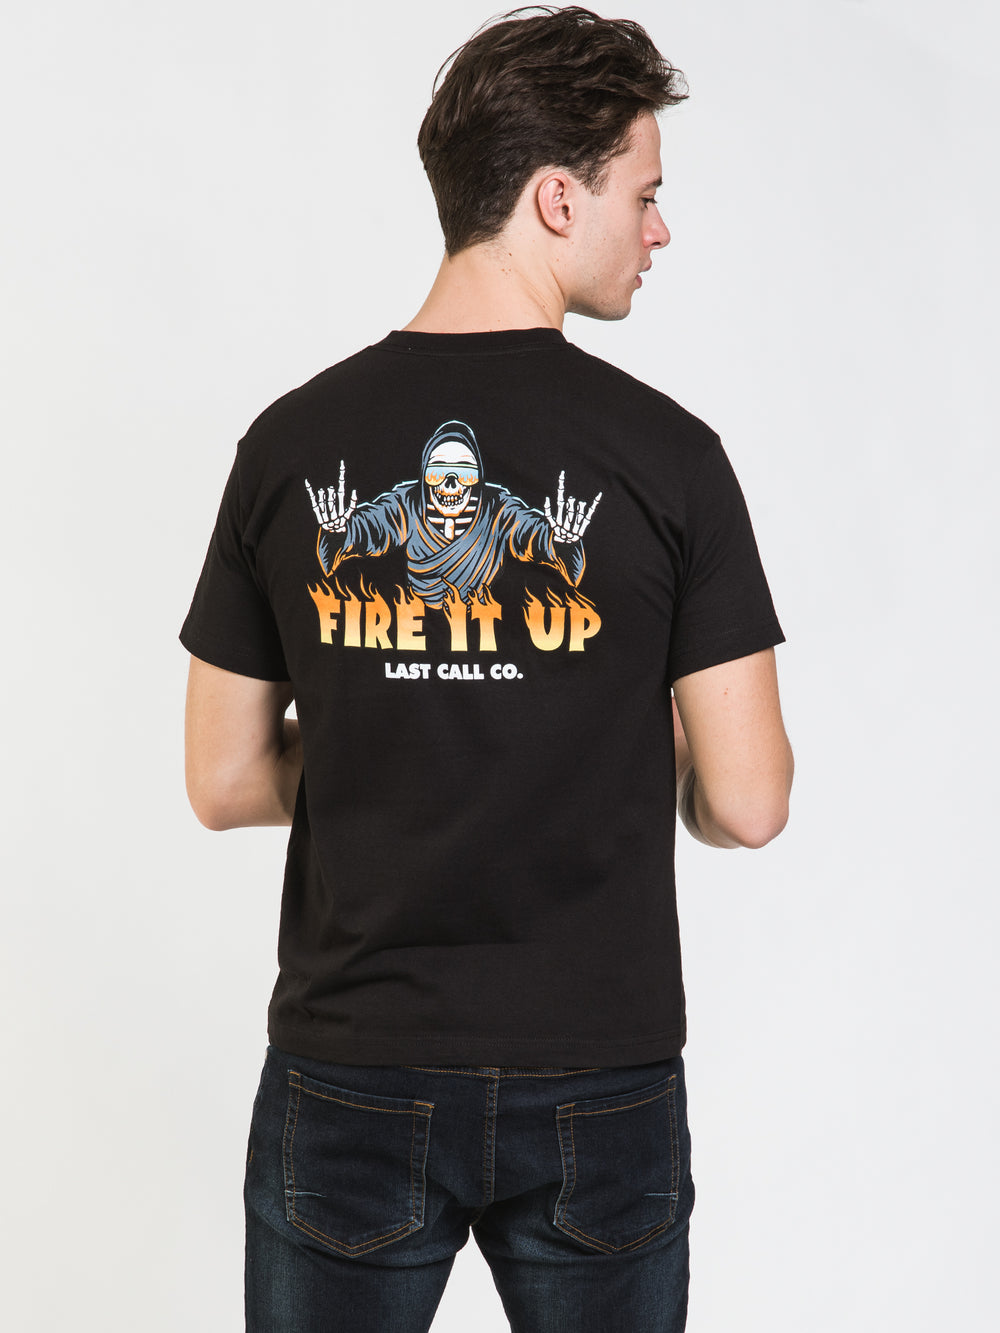 LAST CALL FIRE IT UP T-SHIRT - CLEARANCE